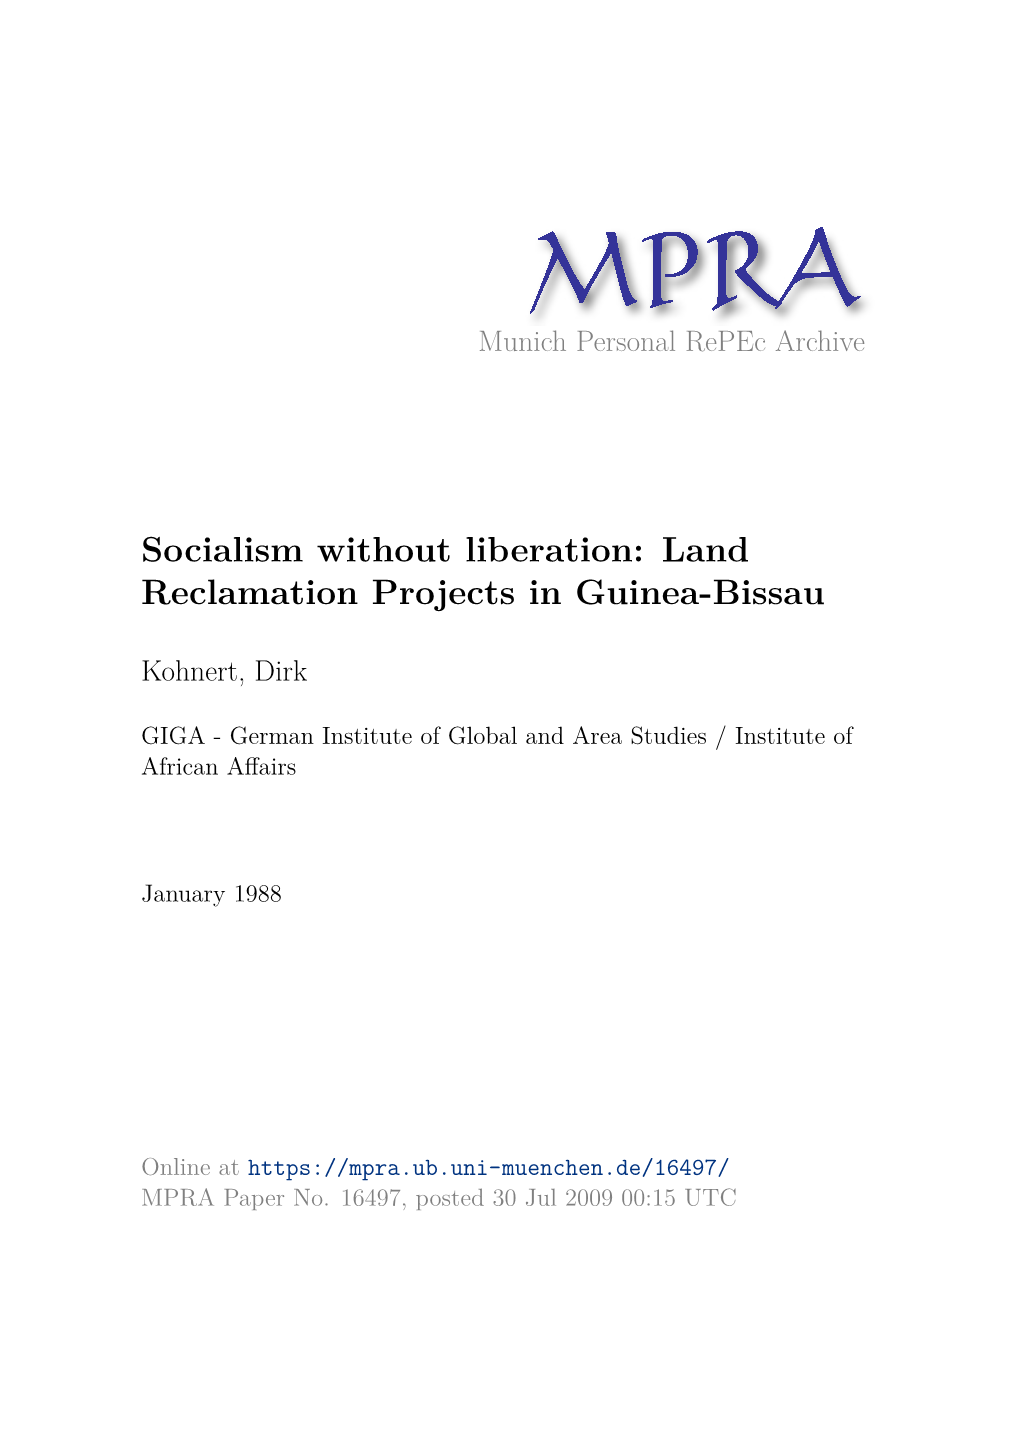 Socialism Without Liberation: Land Reclamation Projects in Guinea-Bissau